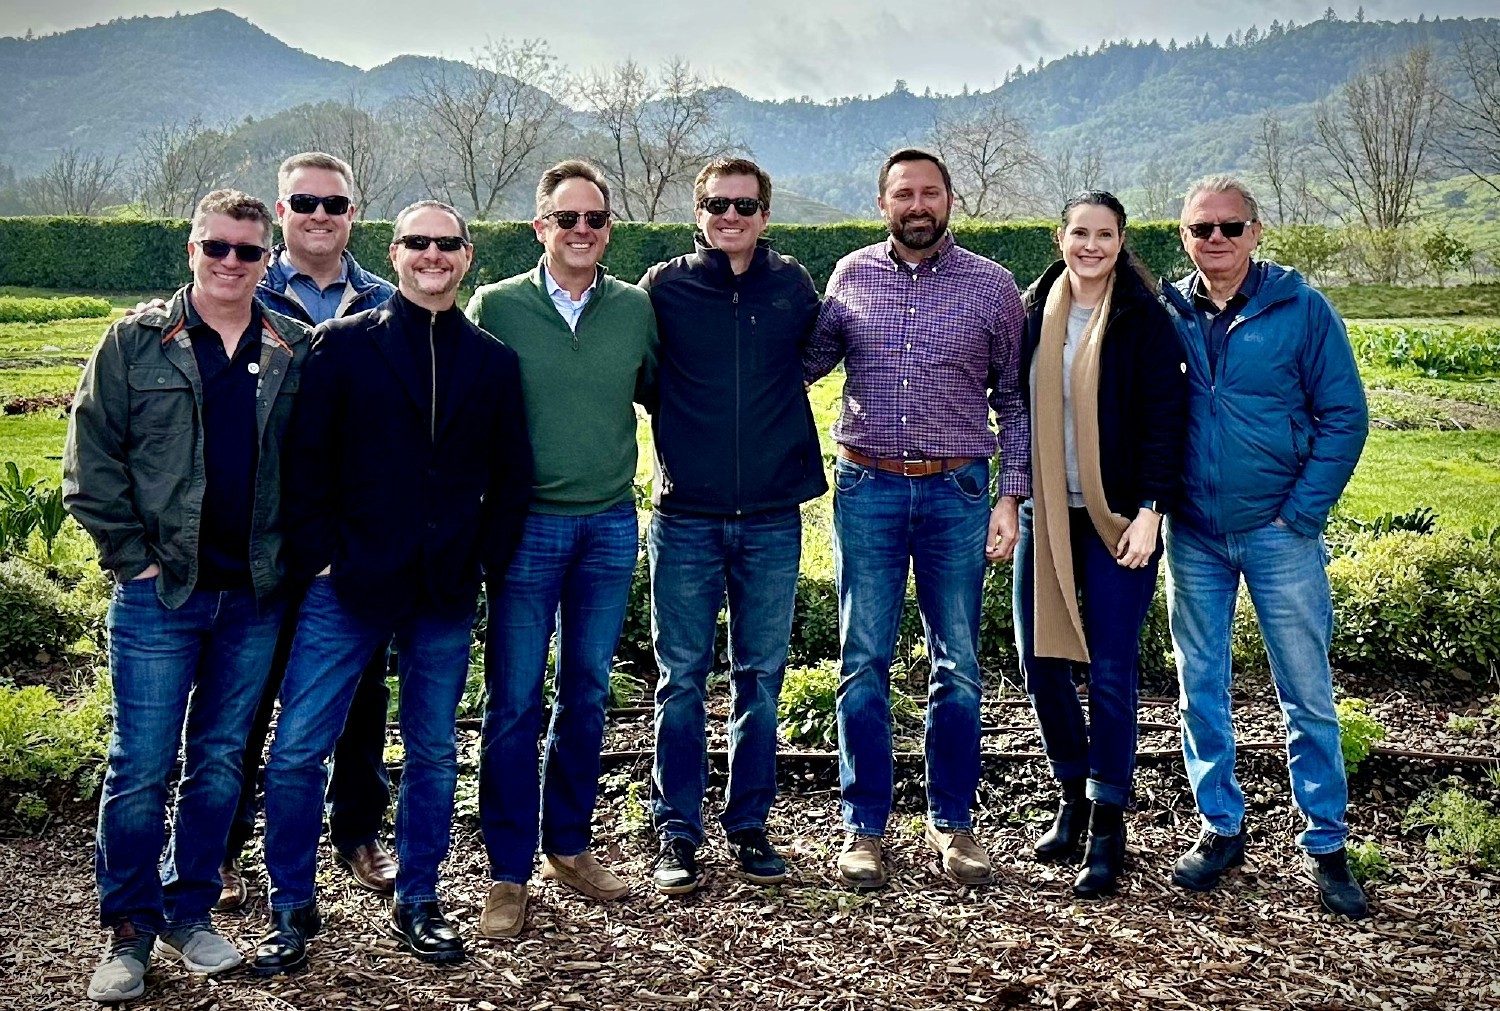 Our leadership team in Napa.